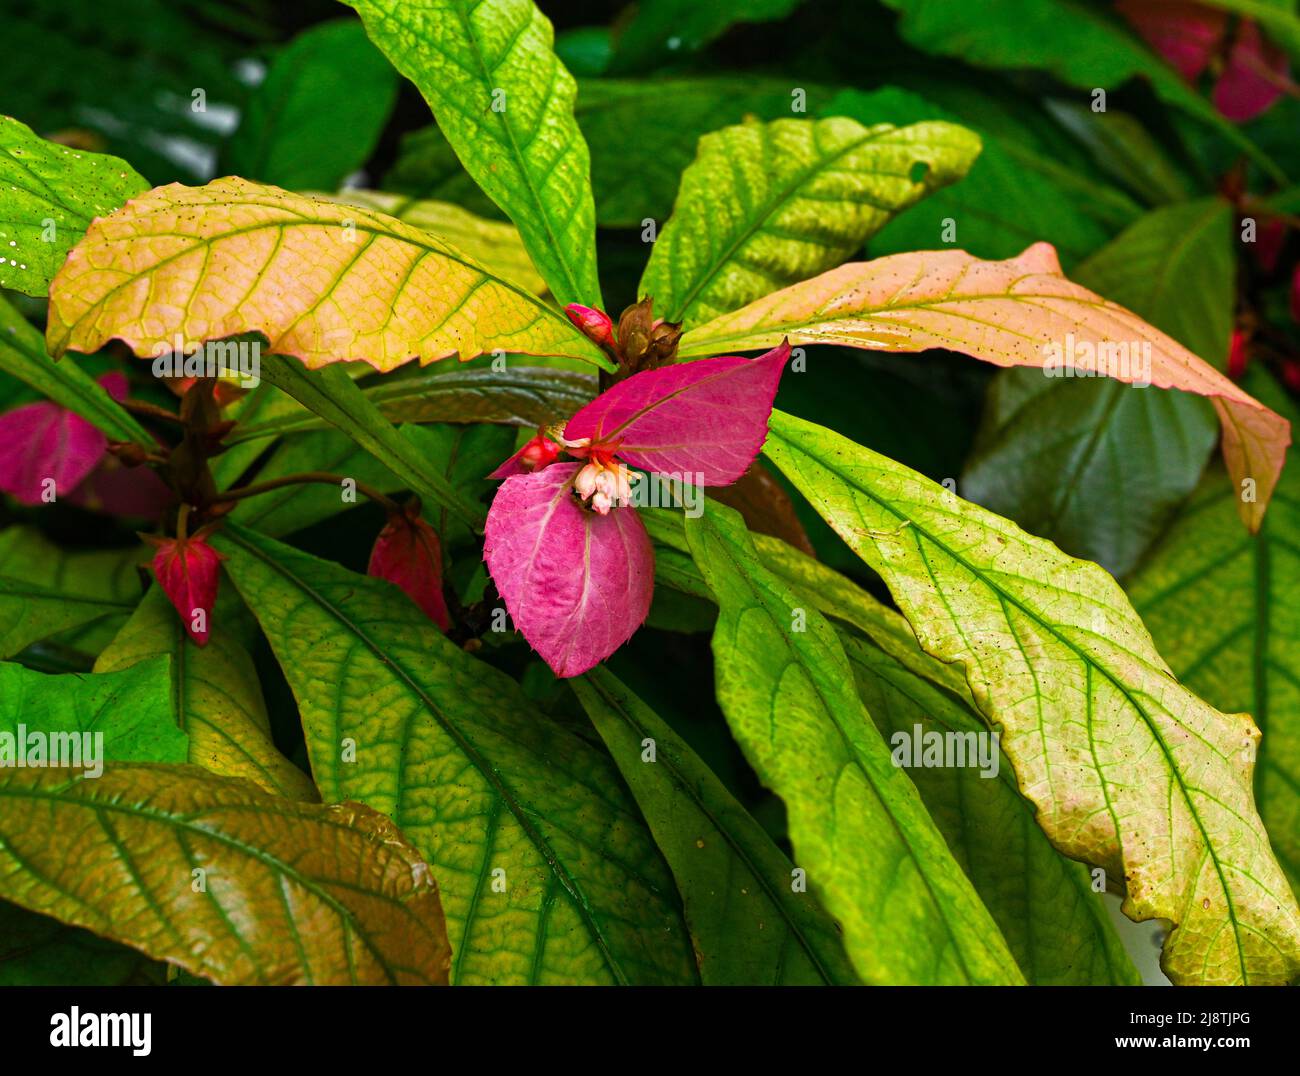 Dalechampia spathulata. It is native to Central America and Southern Mexico. Botanical garden Heidelberg, Baden Wuerttemberg, Germany Stock Photo